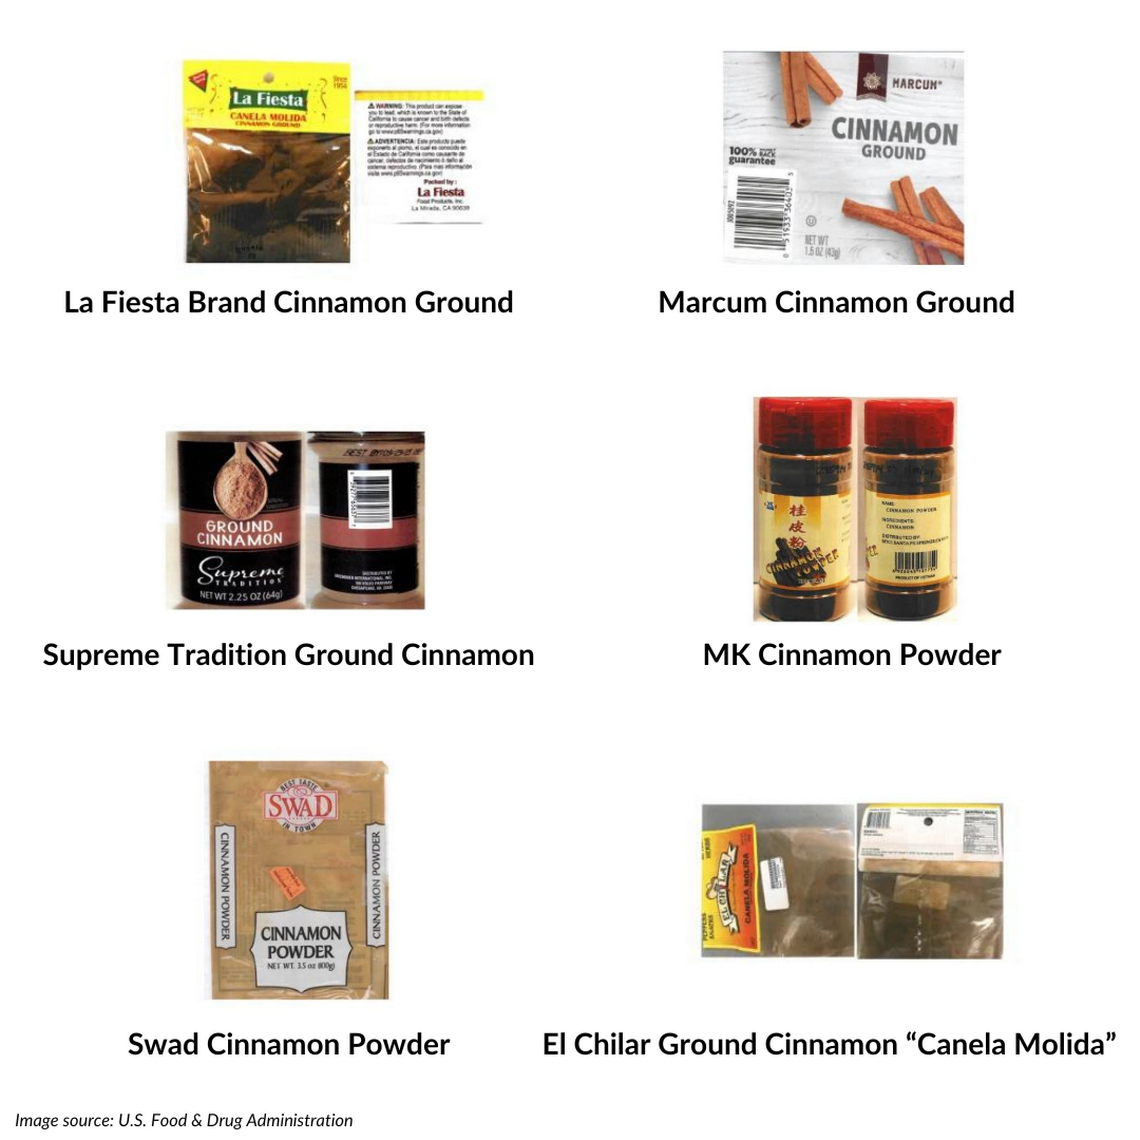 These ground cinnamon brands may be contaminated with lead, according to Washington Poison Control. Washington Poison Control